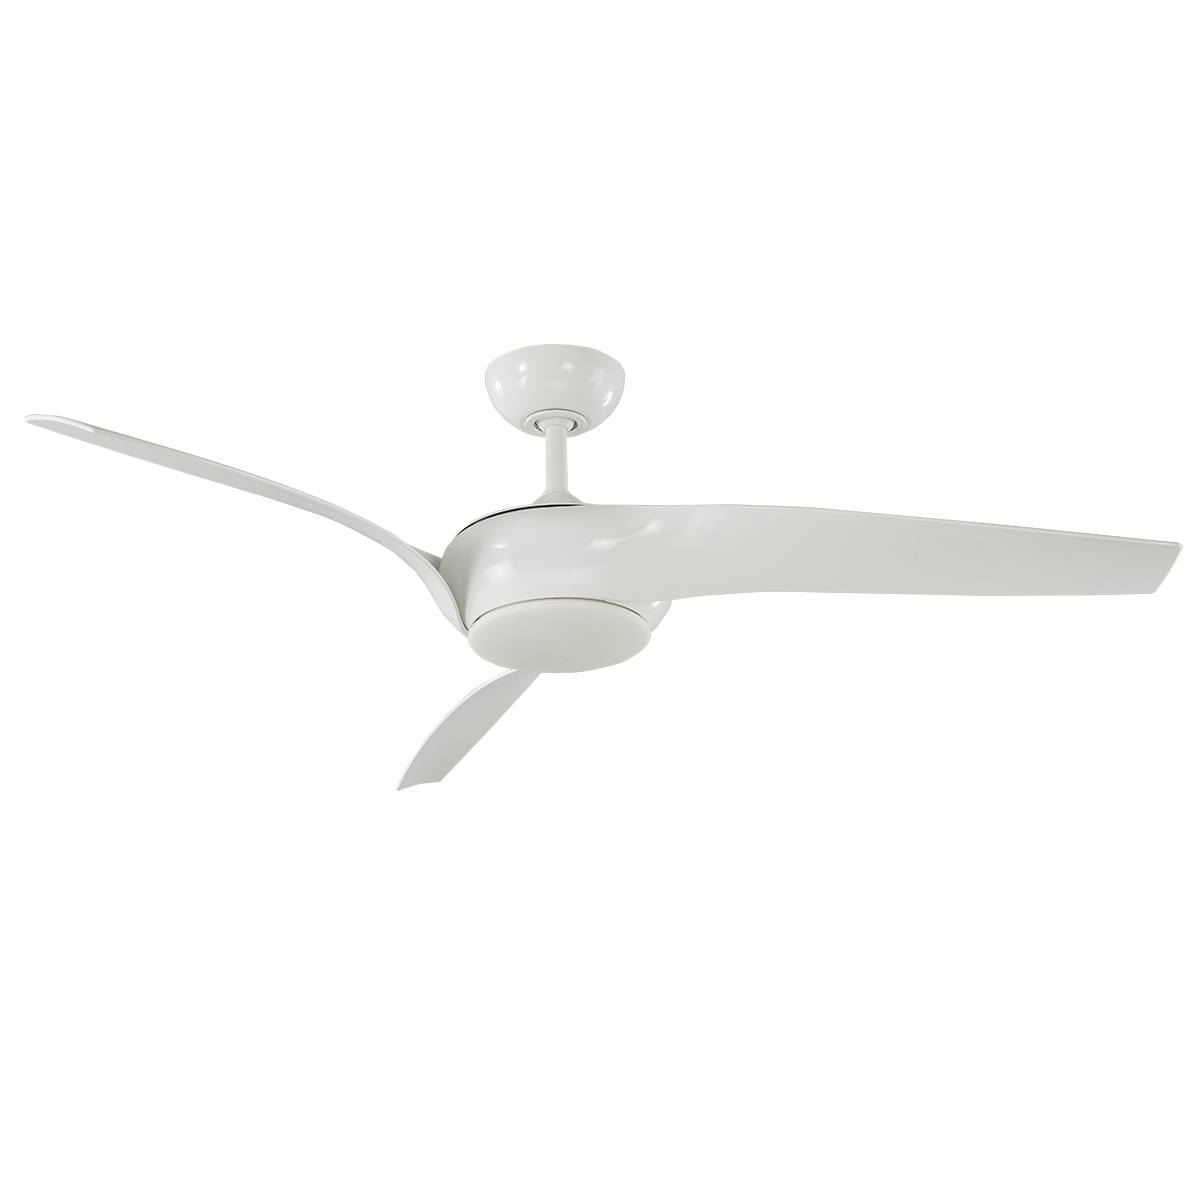 Nirvana Indoor/Outdoor 3-Blade Smart Ceiling Fan 56" with LED Light Kit and Remote Control